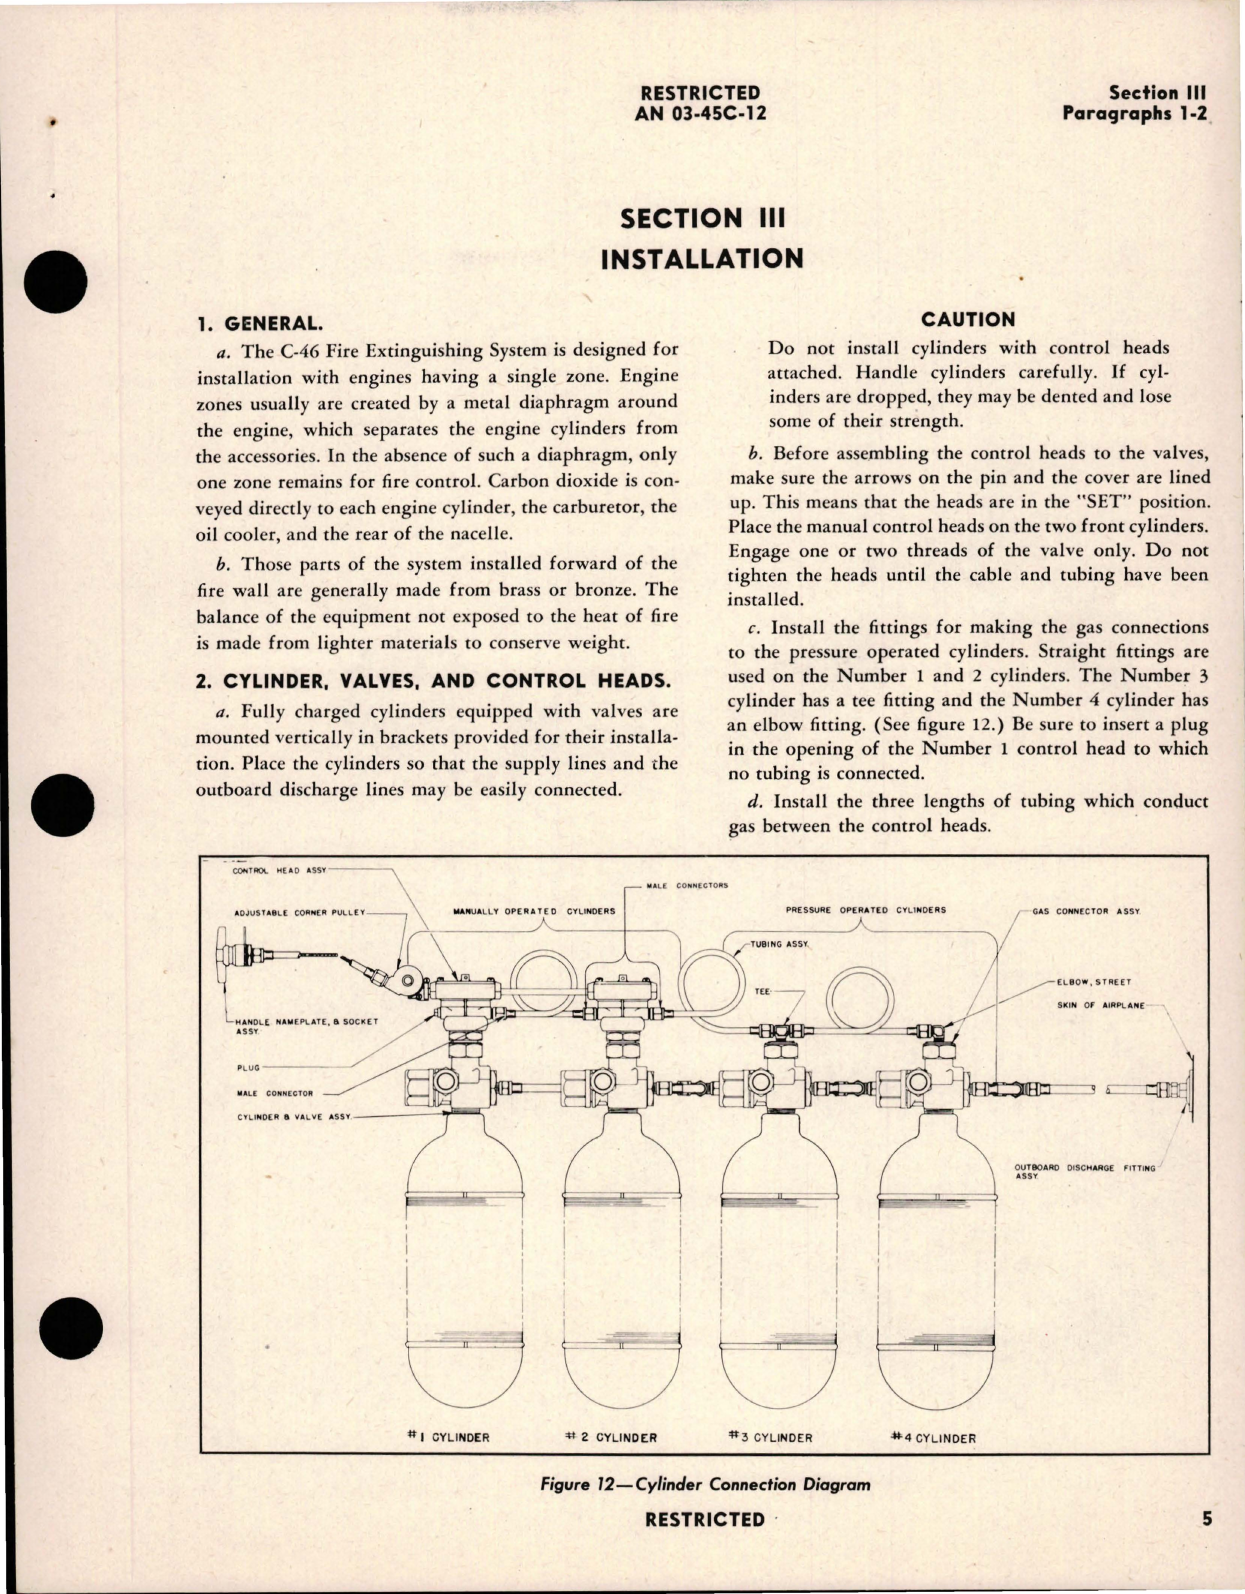 Sample page 7 from AirCorps Library document: Instructions with Parts Catalog for Type C-46 Fire Extinguisher System